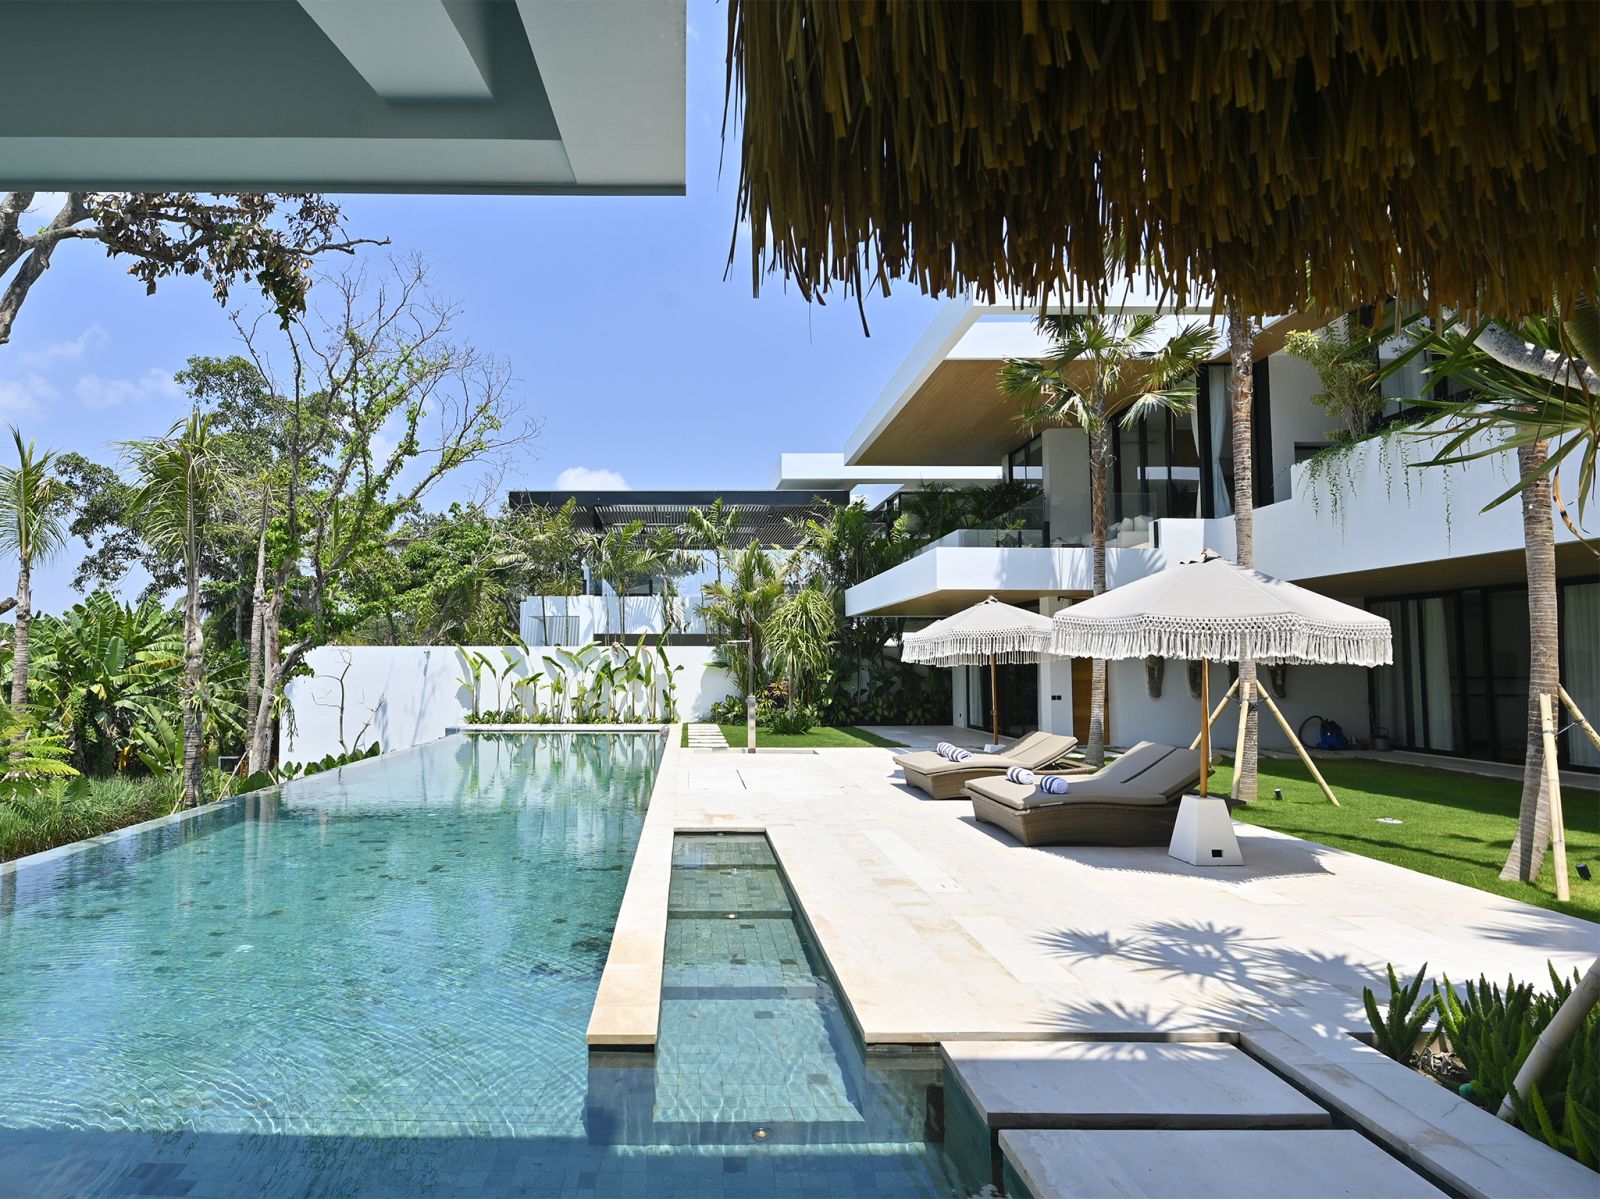 05 villa nica a captivating view of the pool deck from the sunken outdoor sala